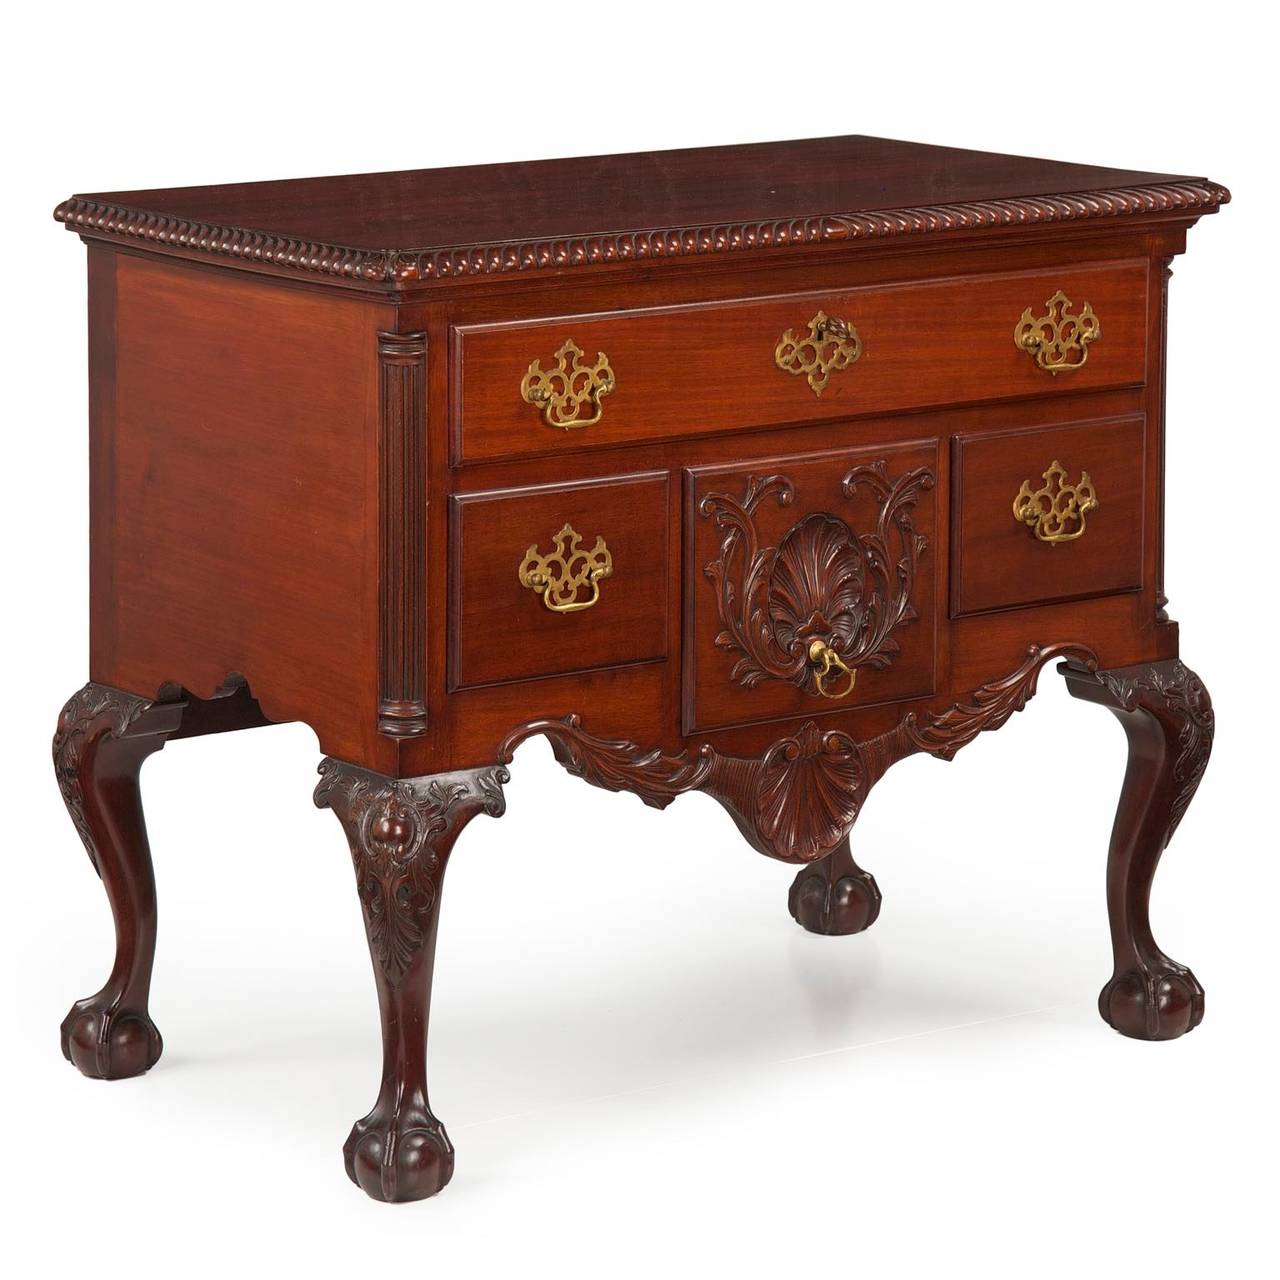 A very finely hand crafted reproduction of the Philadelphia lowboys of the last quarter of the 18th Century, this exquisite piece is the most carefully and authentically crafted reproduction lowboy we've worked with.  The vibrant and active grain of